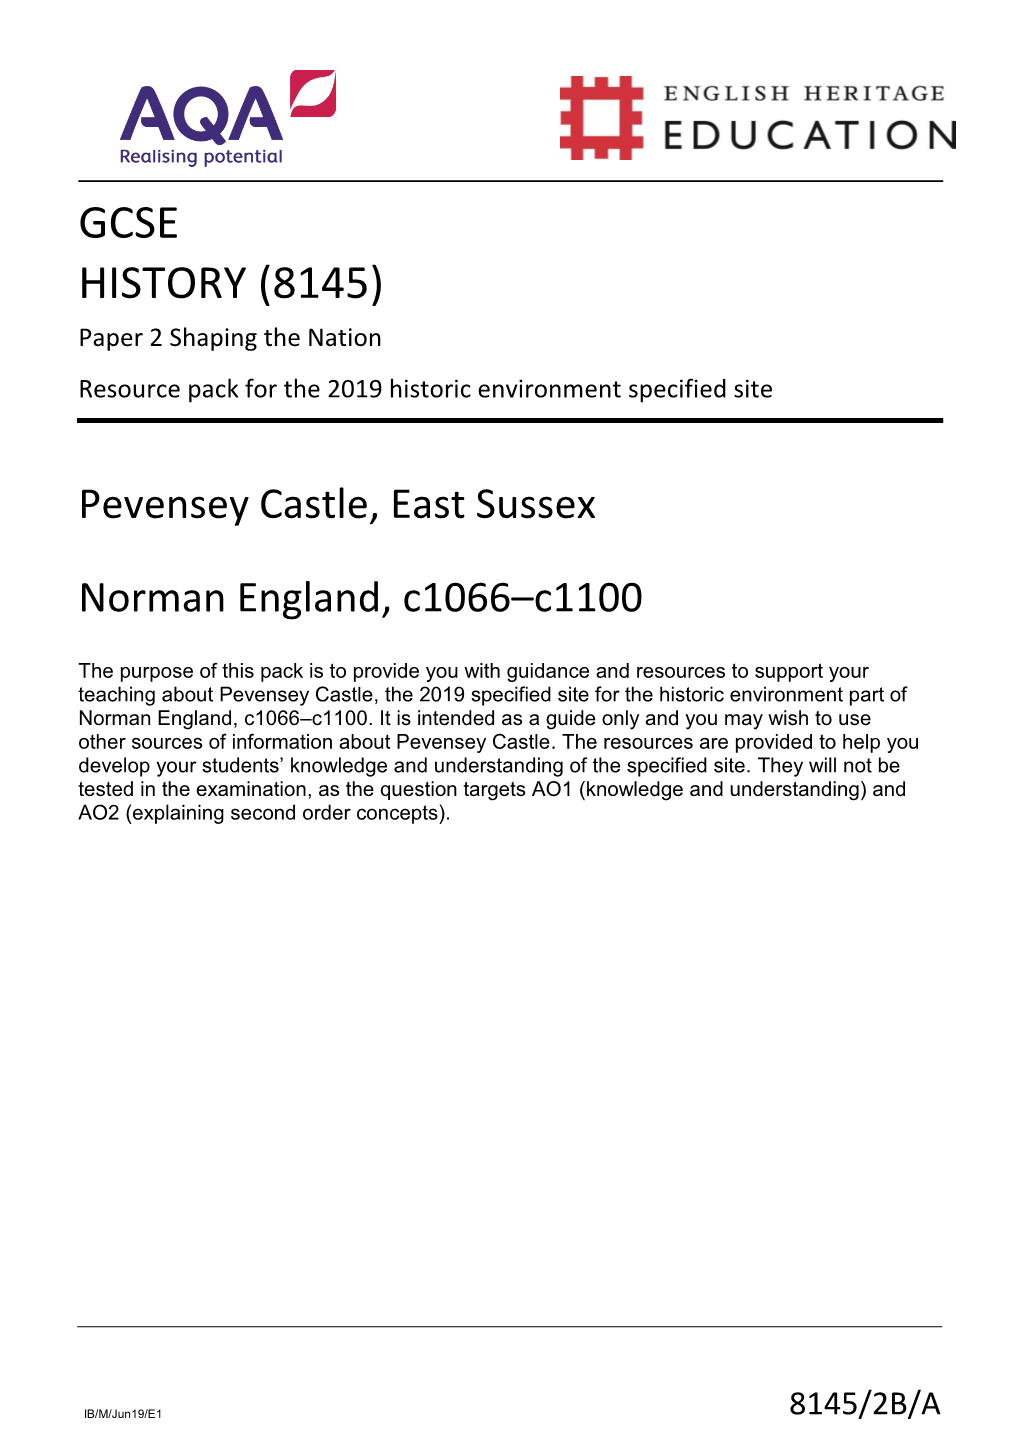 Pevensey Castle AQA Resource Pack Norman England